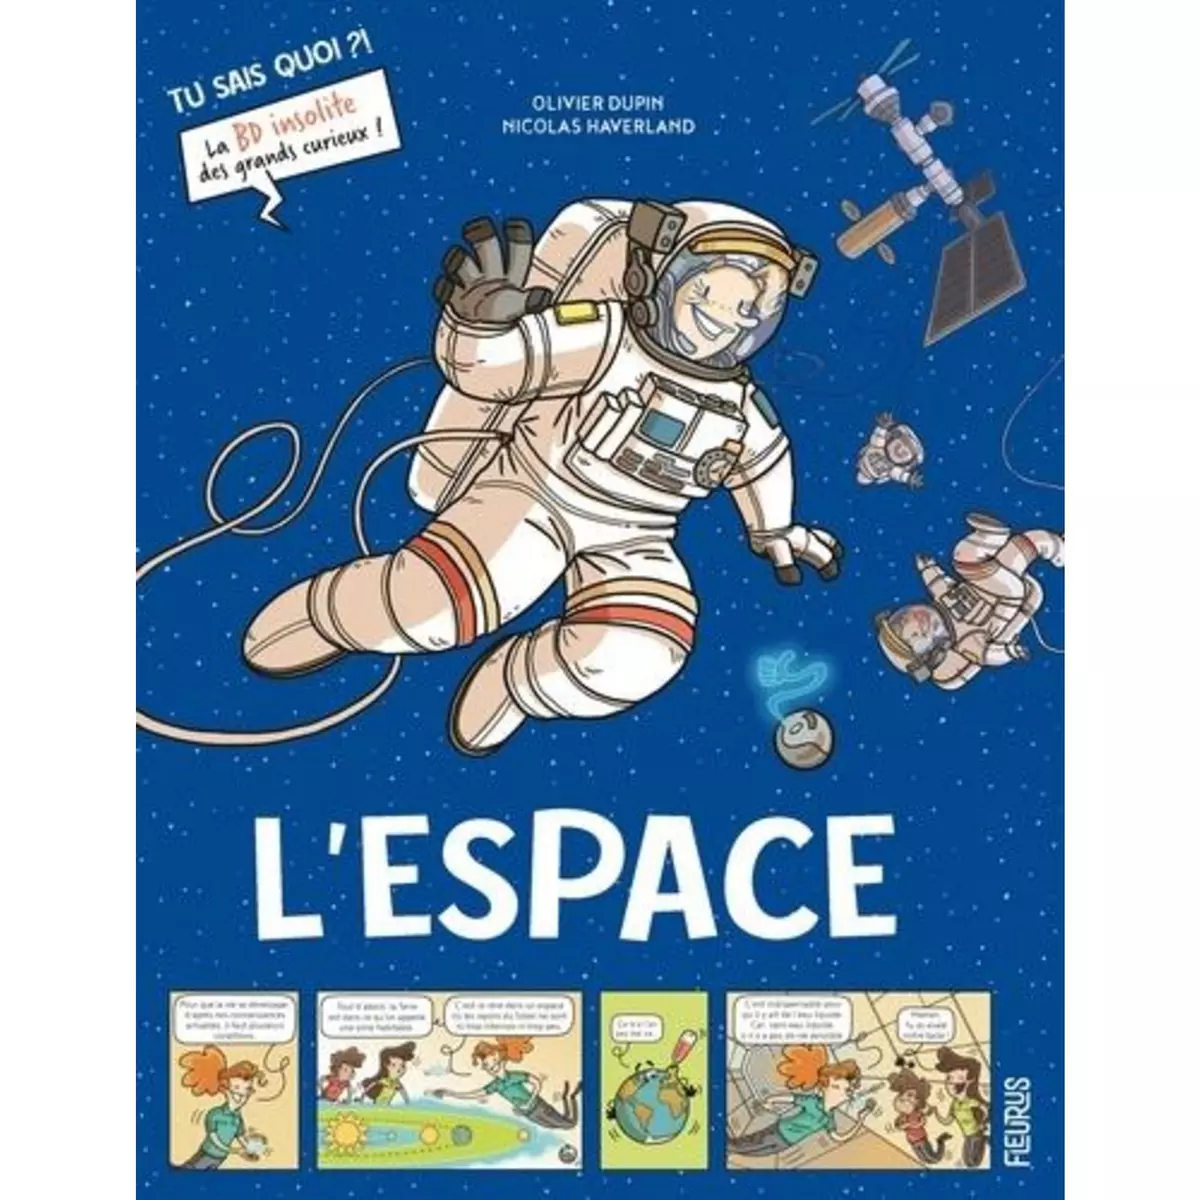  L'ESPACE, Dupin Olivier